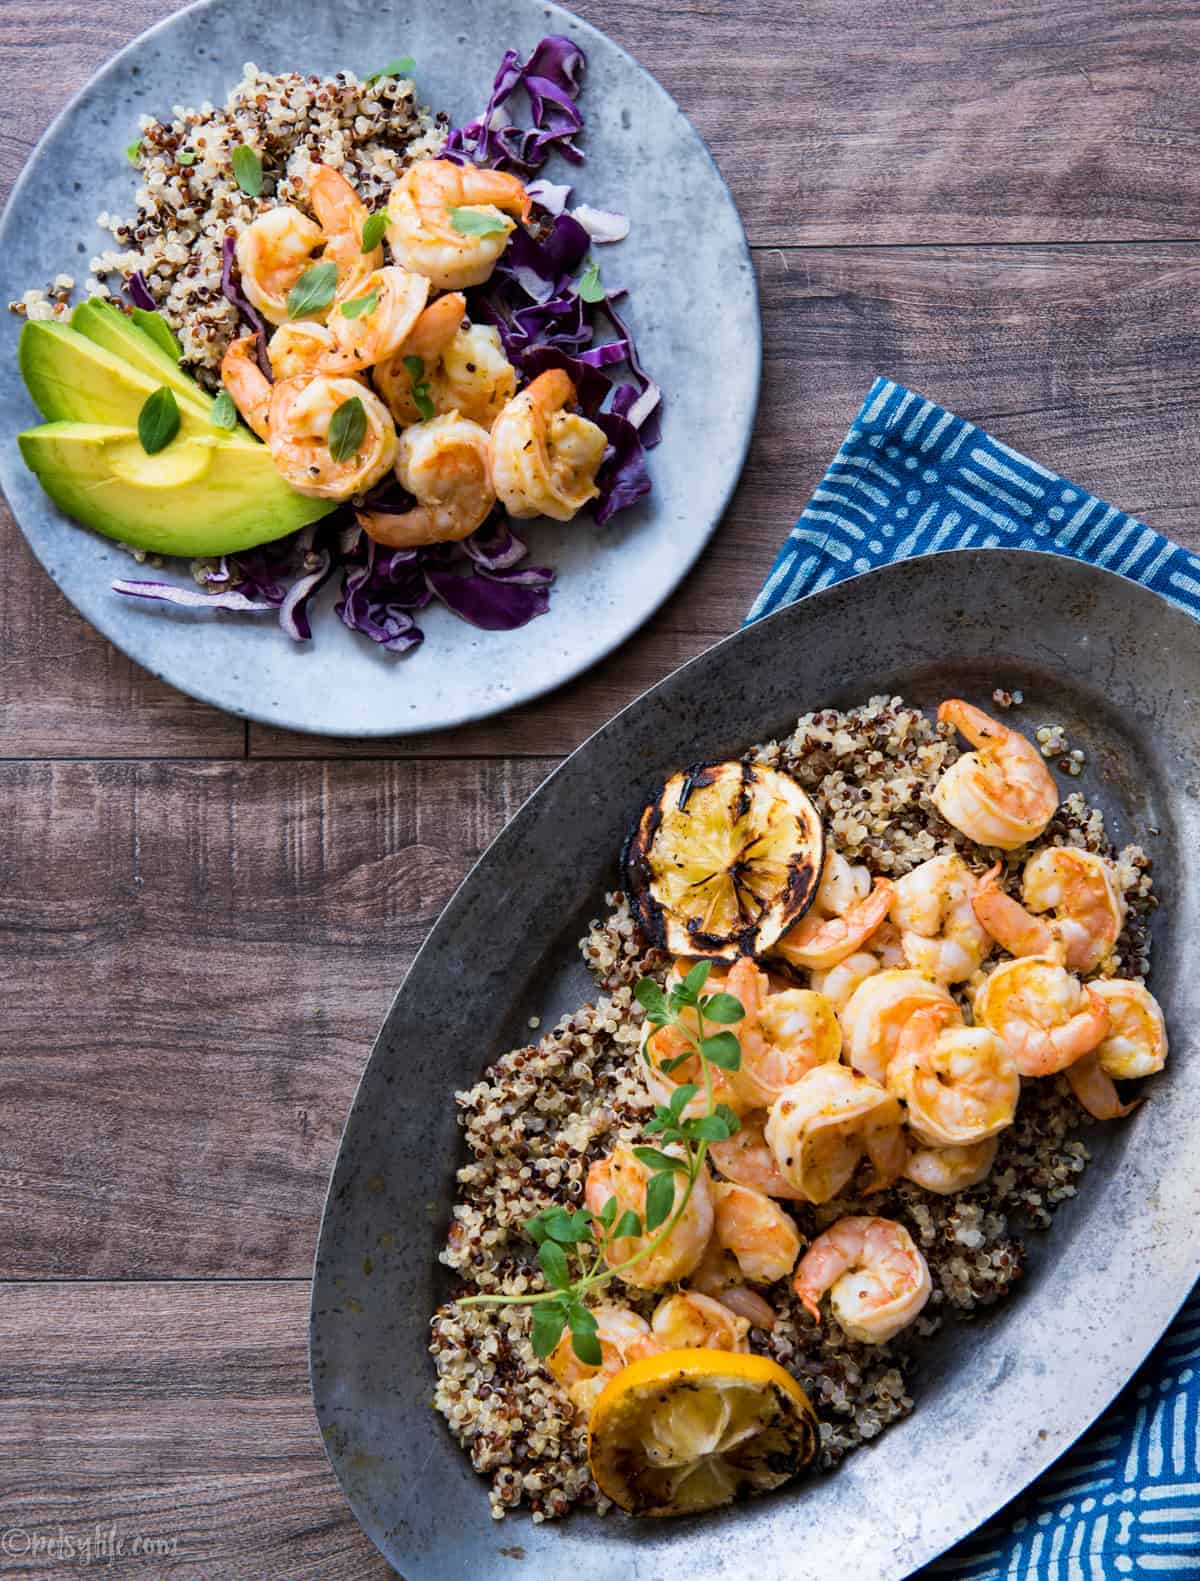 Metal serving plate full of orange shrimp and quinoa next to a gray plate of a dished up serving